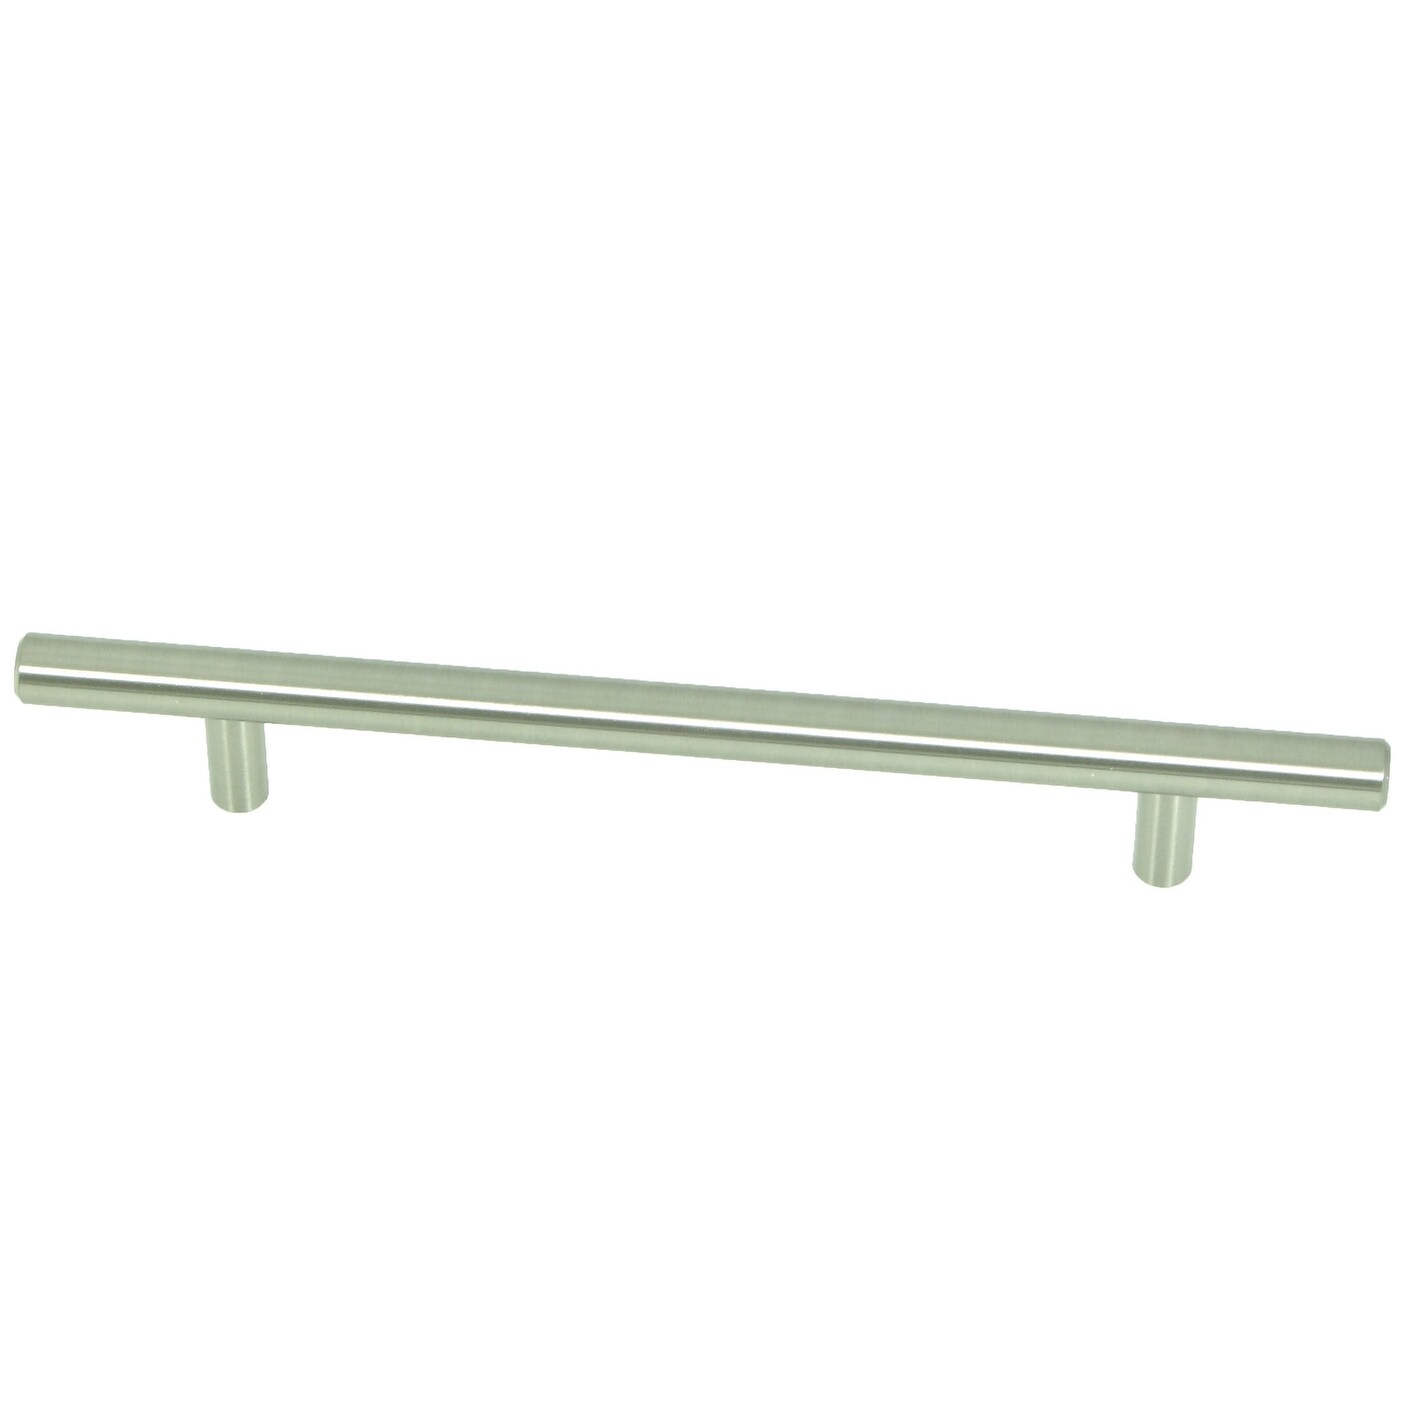 Shop Stone Mill Hardware Stainless Steel Bar Cabinet Pulls Pack